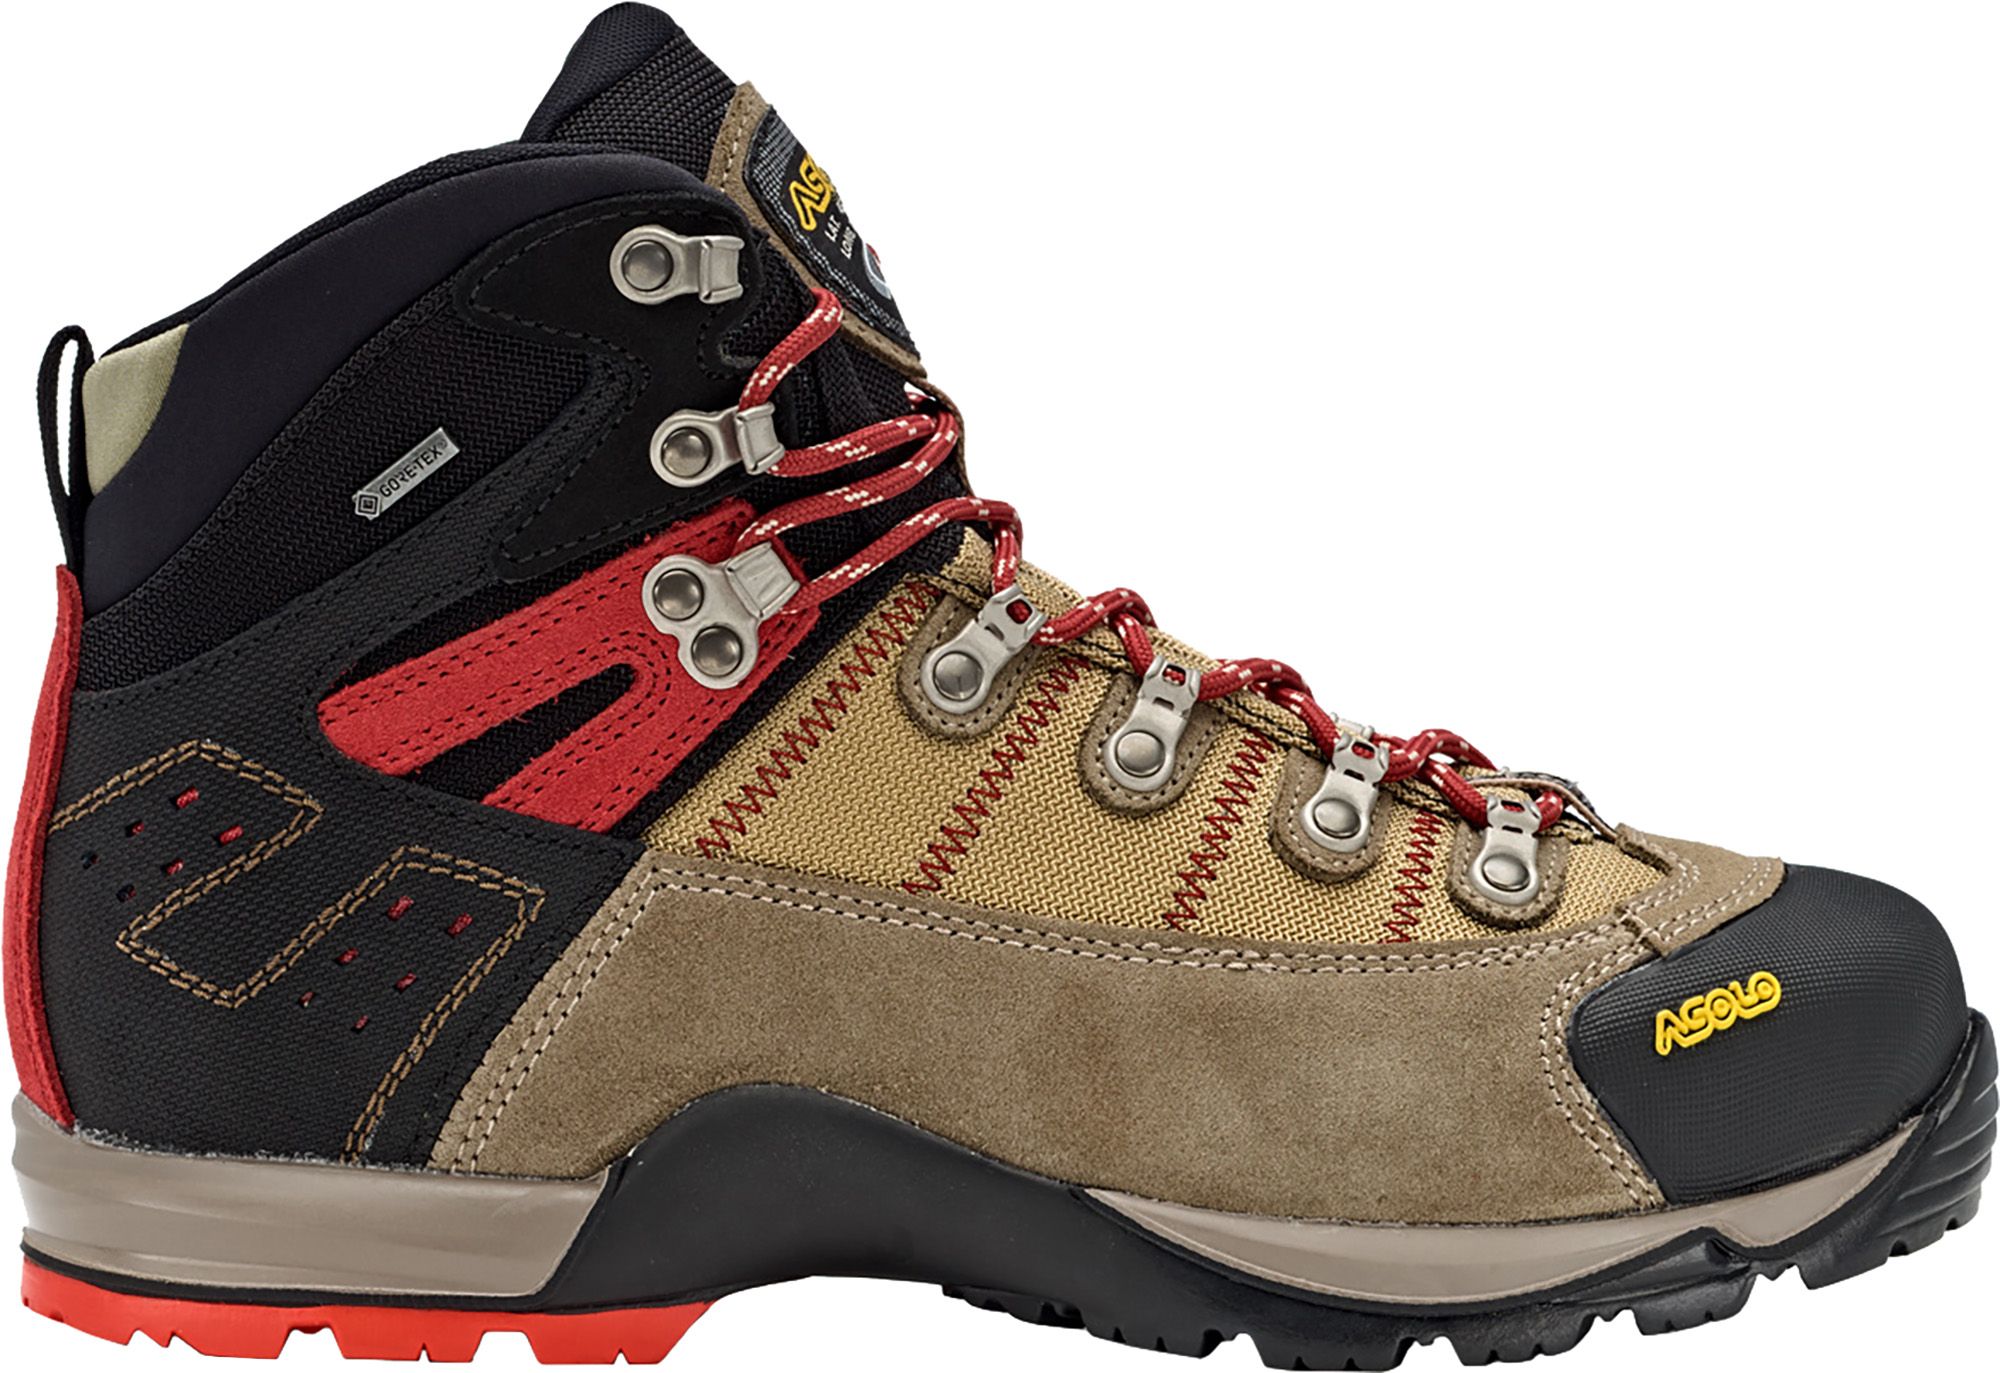 Photos - Trekking Shoes ASOLO Men's Fugitive GTX Hiking Boots, Size 12, Wool/Black | Father's Day 